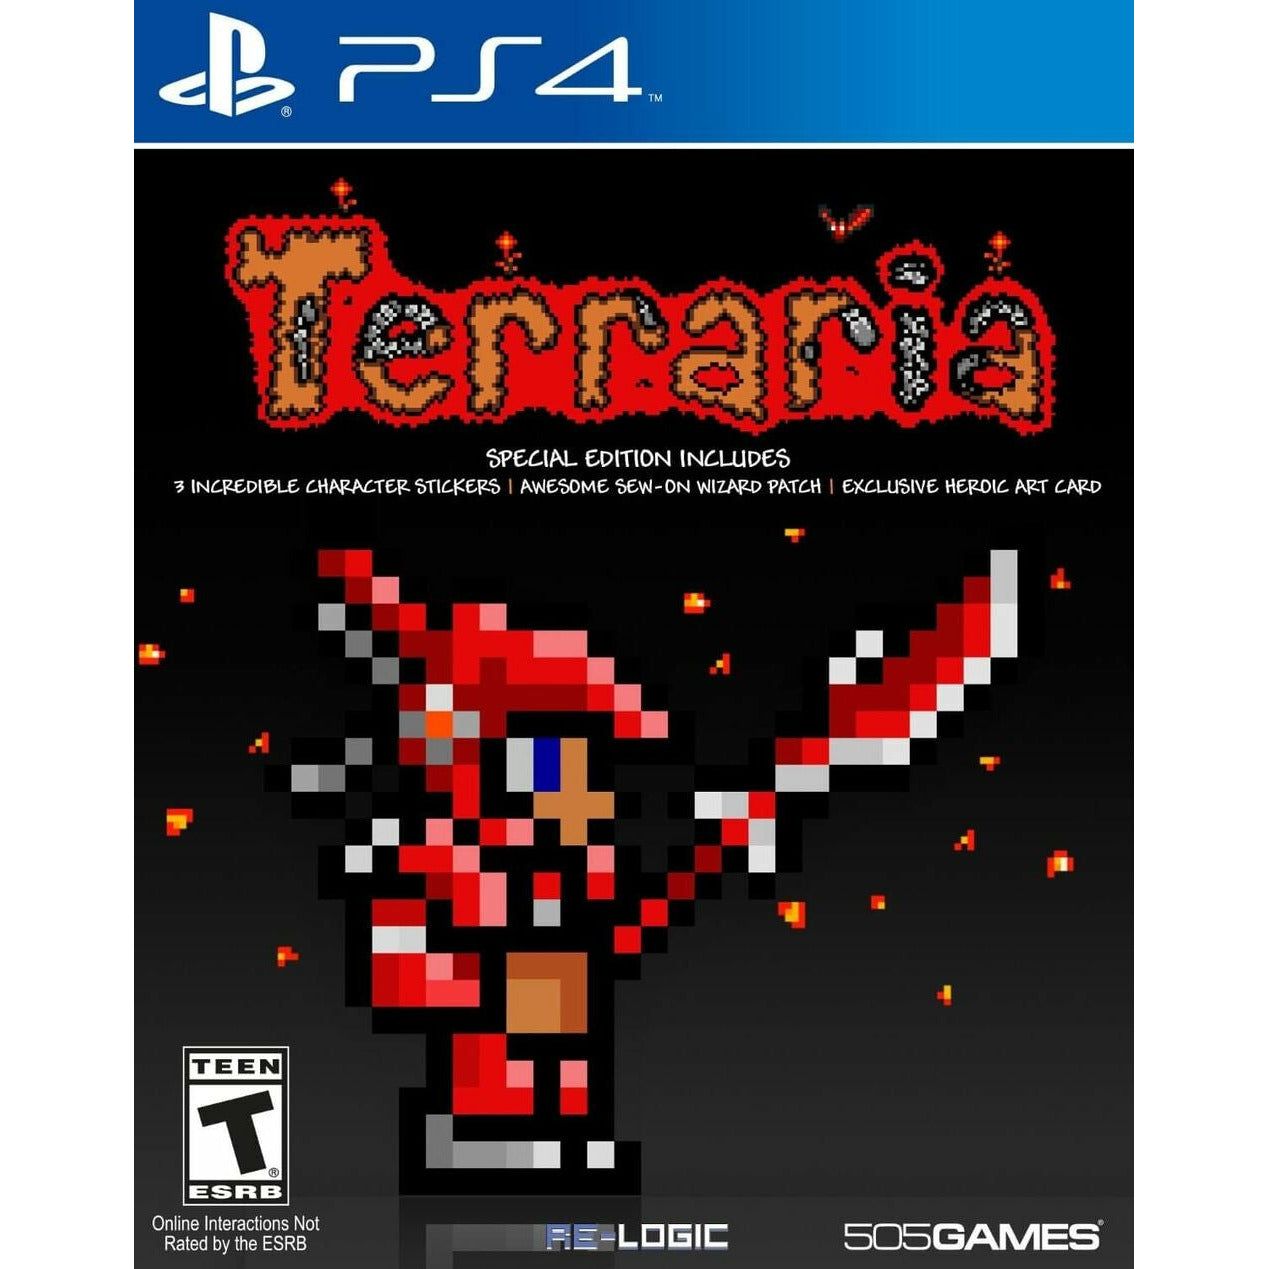 PS4 - Terraria Special Edition (No Stickers, Patch or Heroic Card Included)